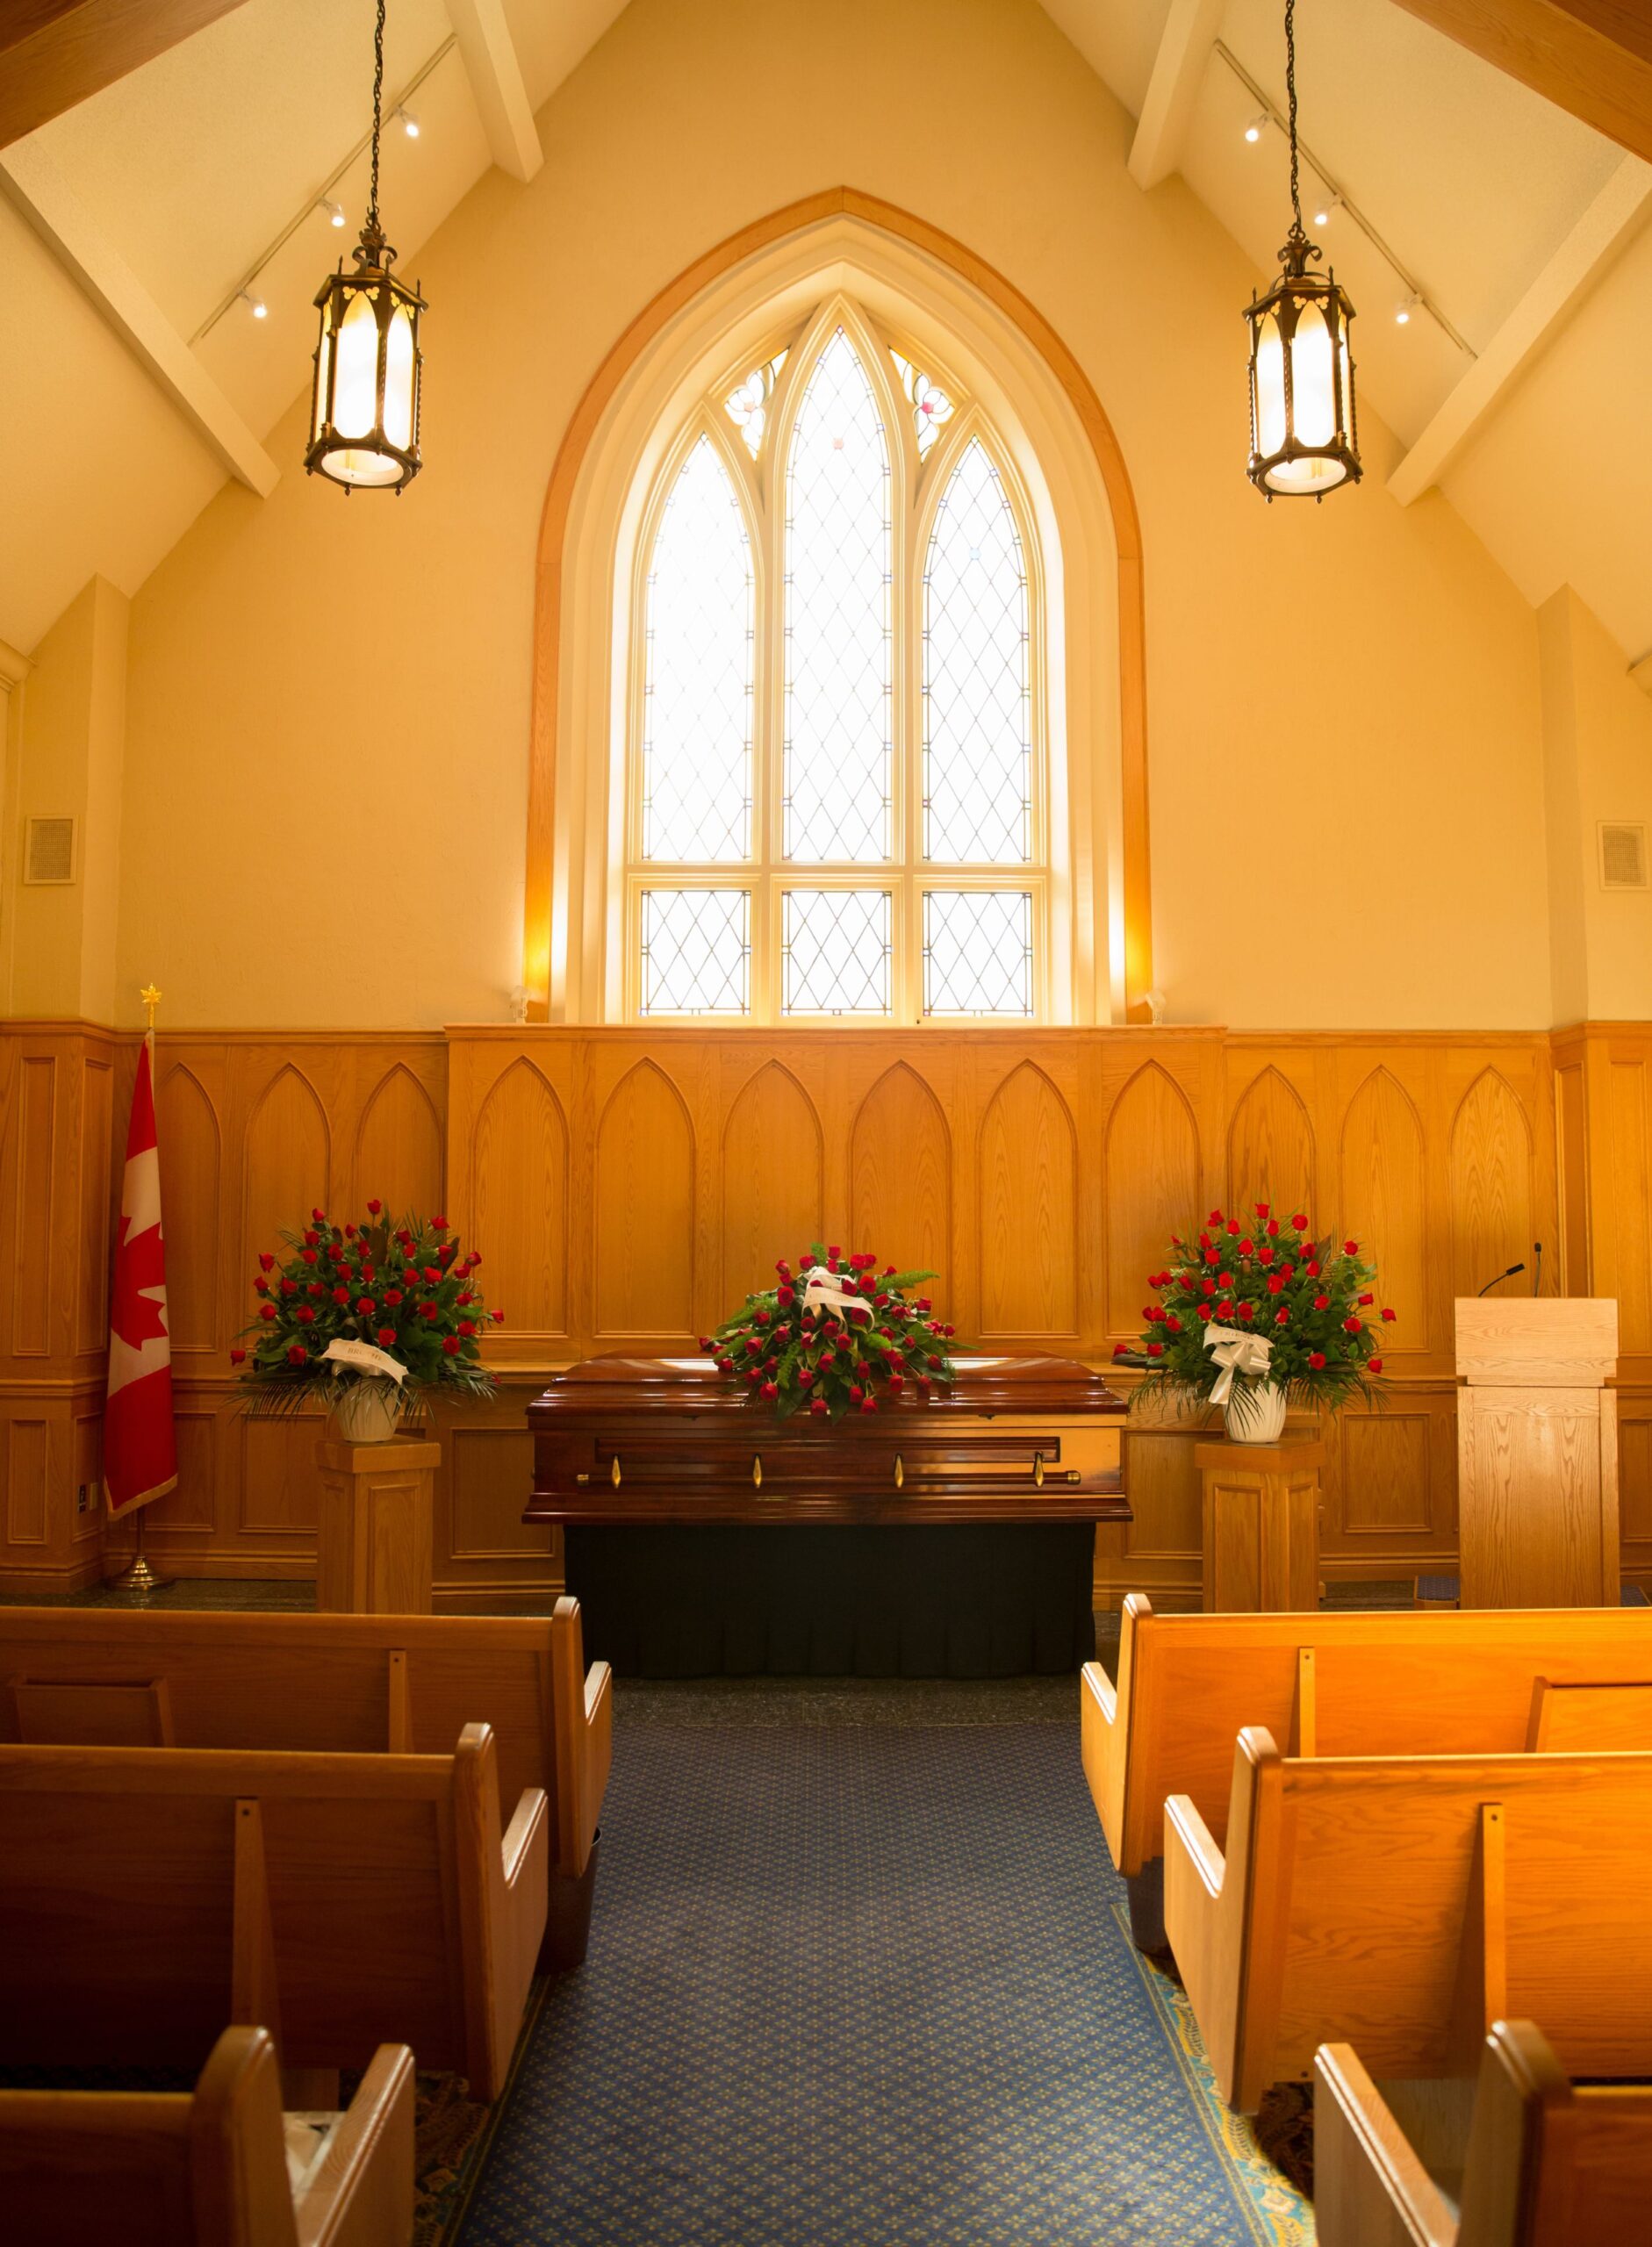 Church scene with a casket in front, representing the need for dedicated funeral answering services.